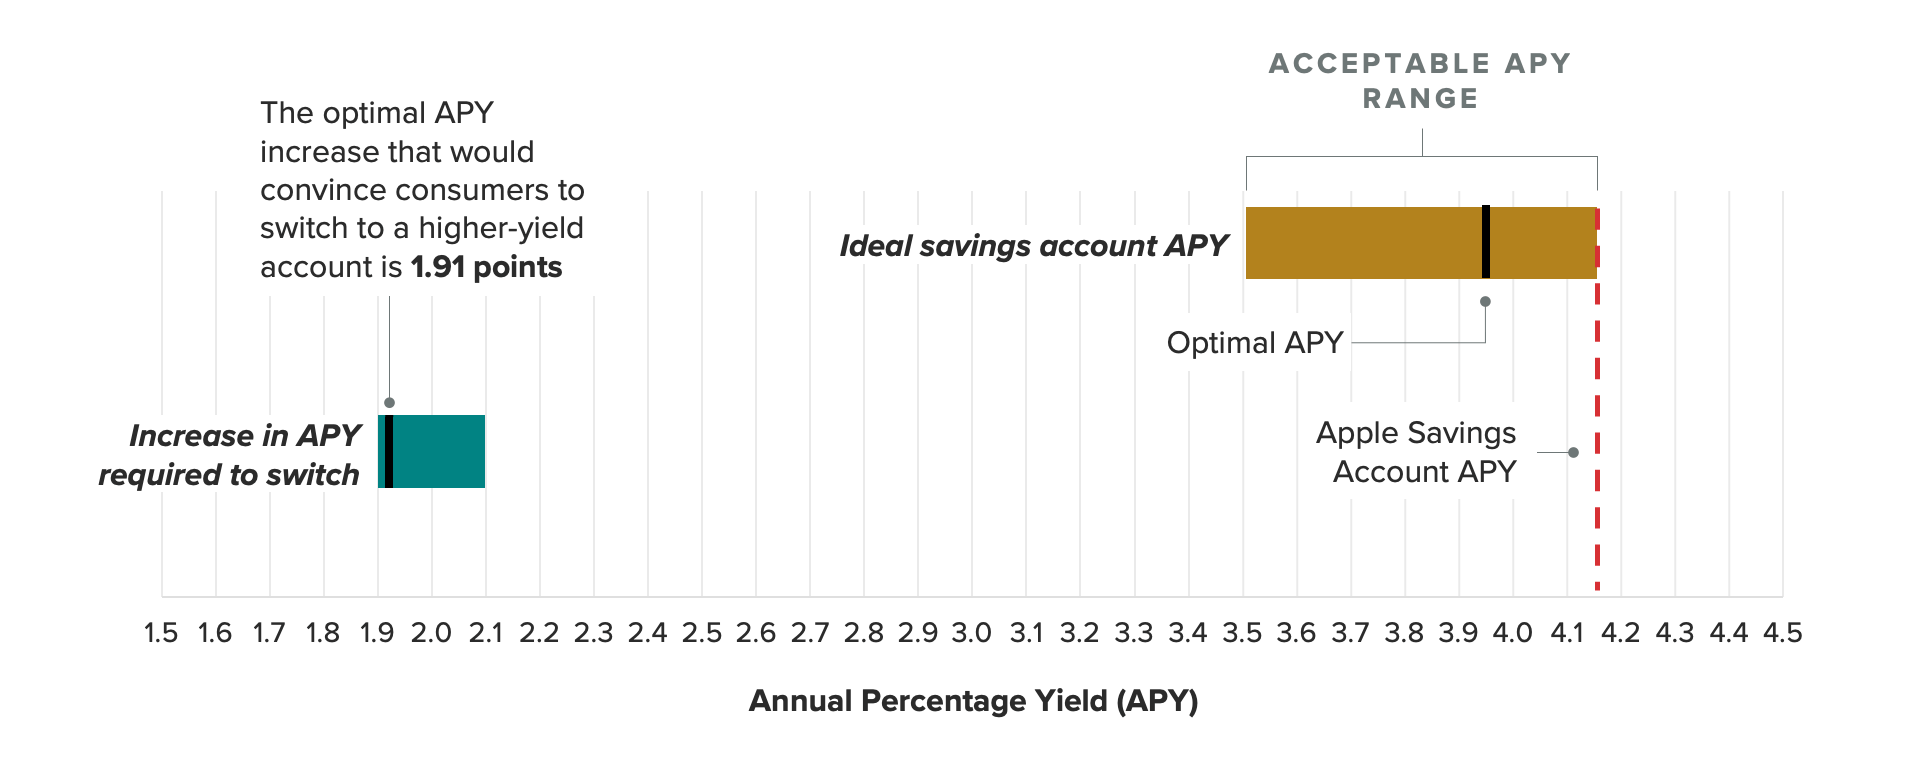 Van Westendorp price chart showing peoples’ ideal annual percentage yield for savings accounts hovers around 3.94%, and it would take an increase of 1.94 points to convince people to consider a savings account provider other than their own.